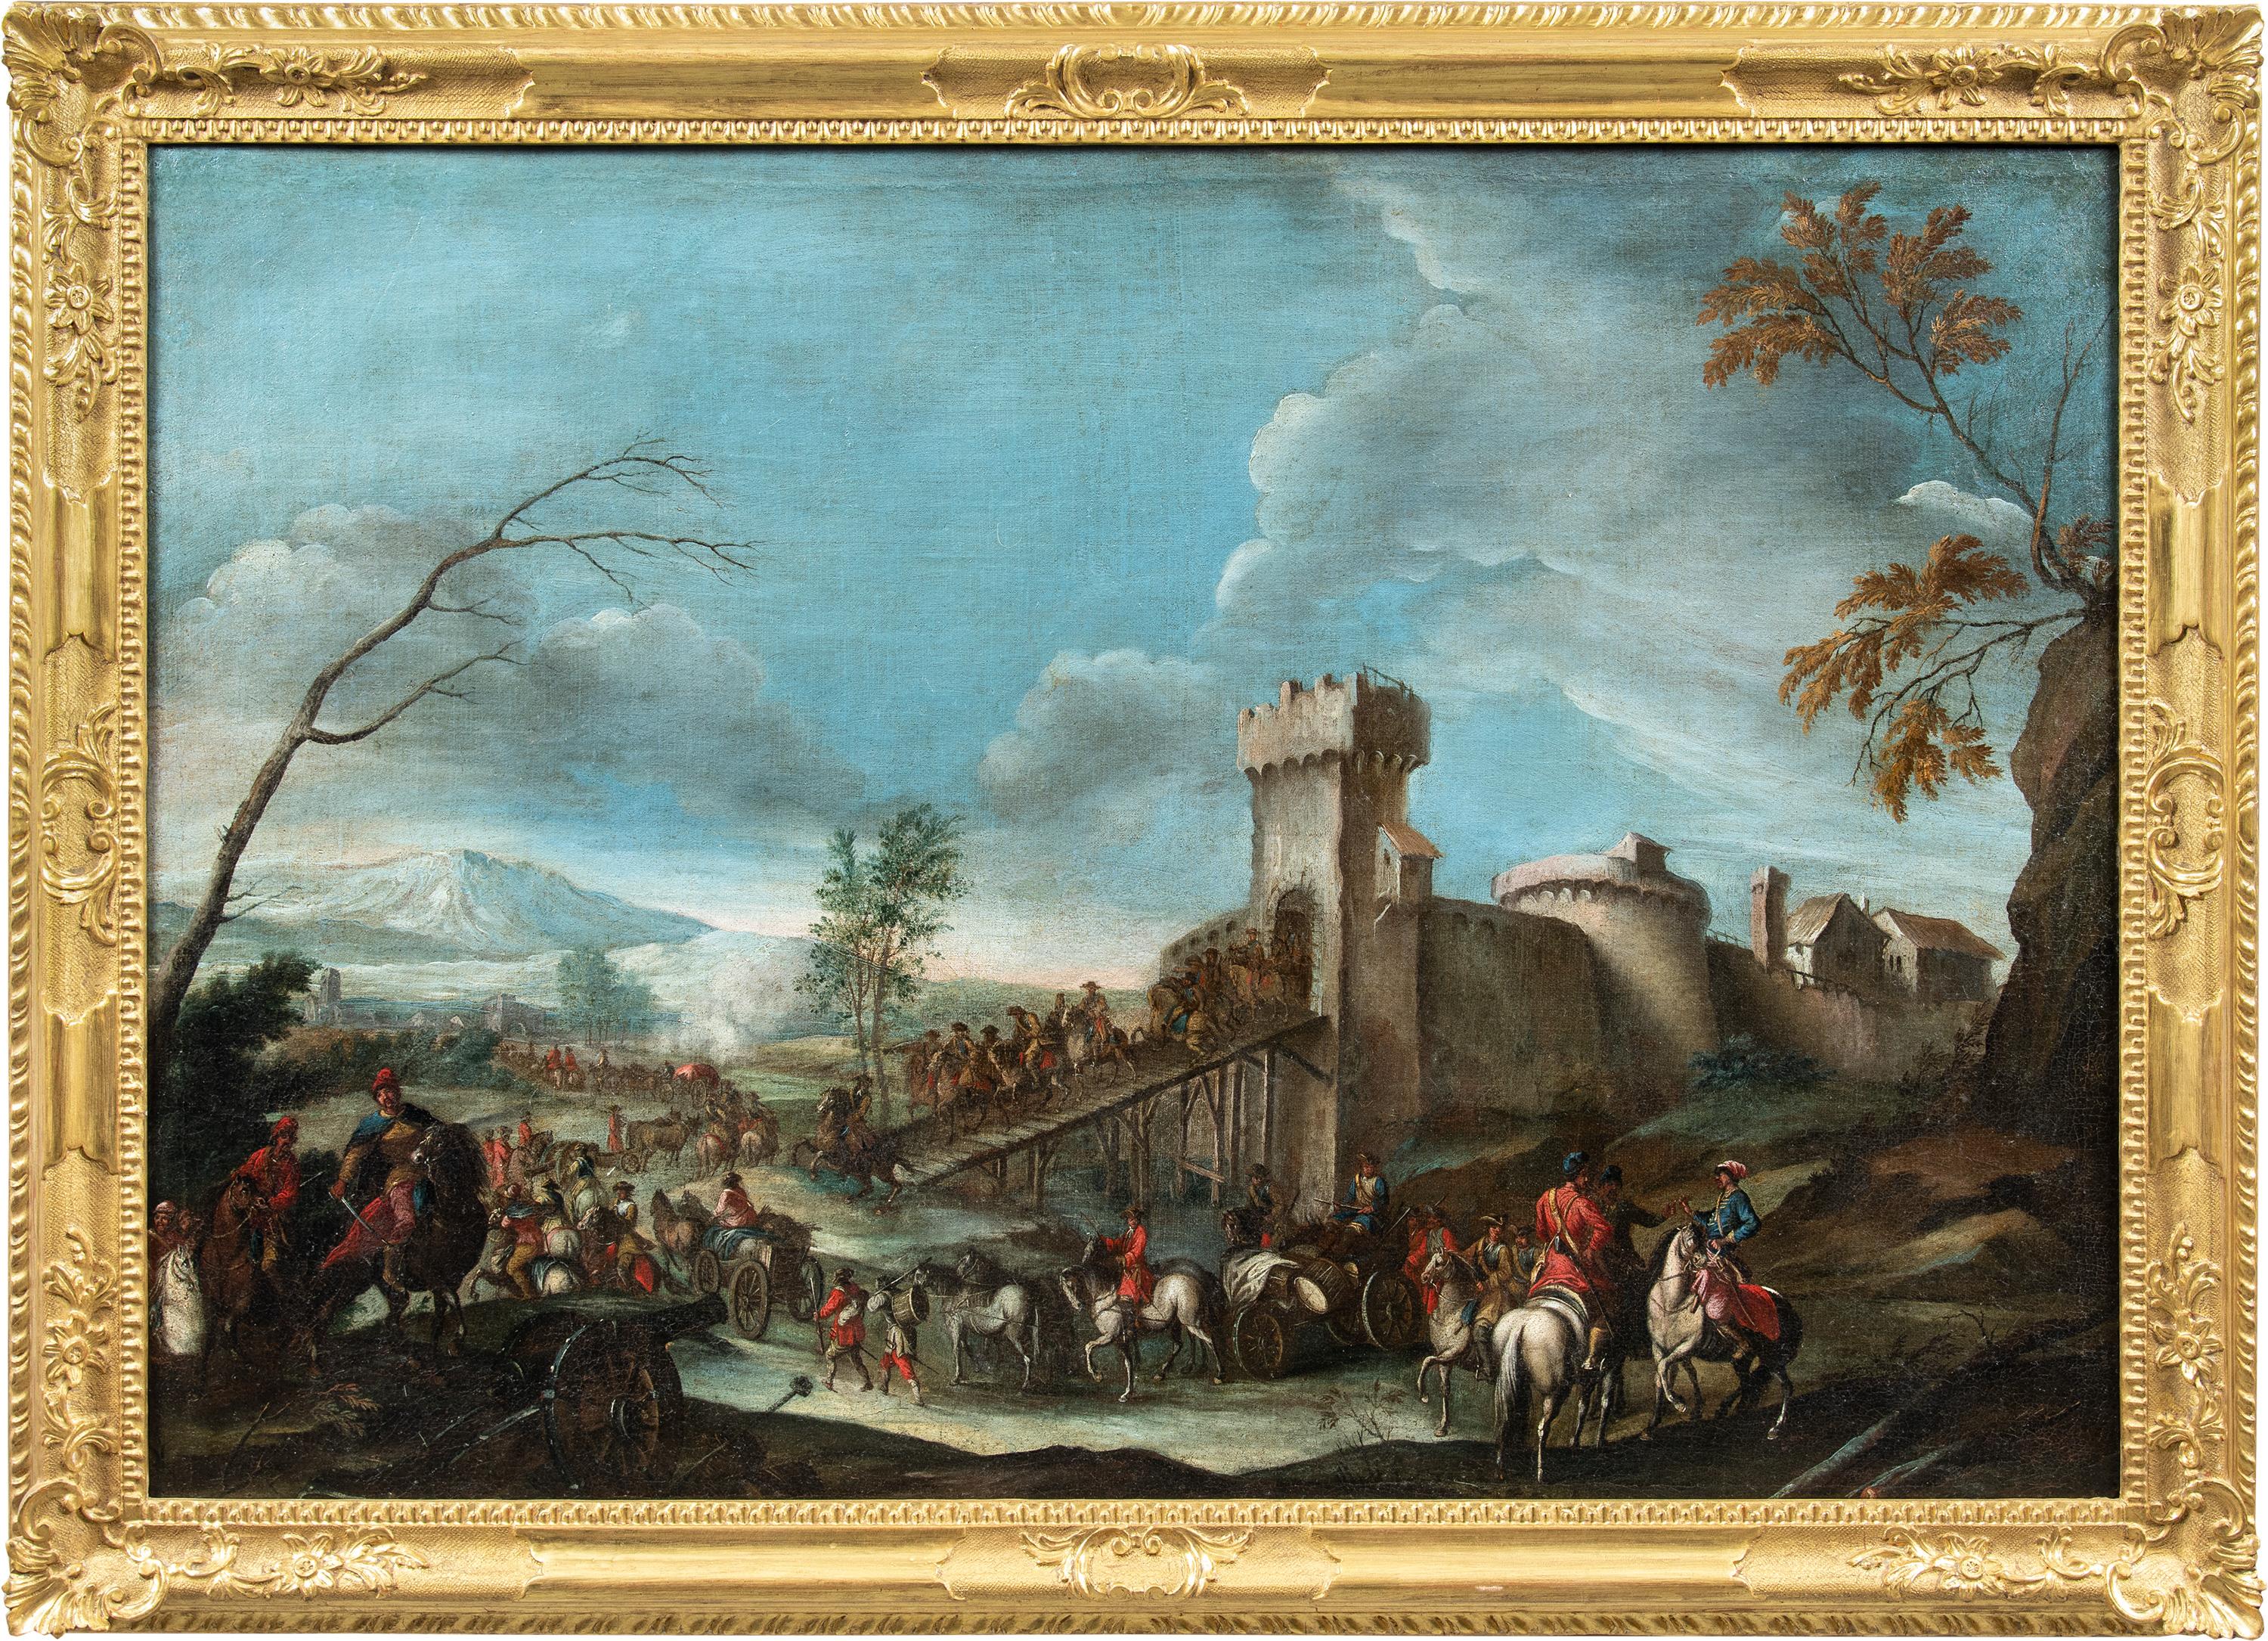 Christian Reder (Monsù Leandro) Landscape Painting - Christian Reder (Italy) - 18th century Italian landscape painting - Soldiers